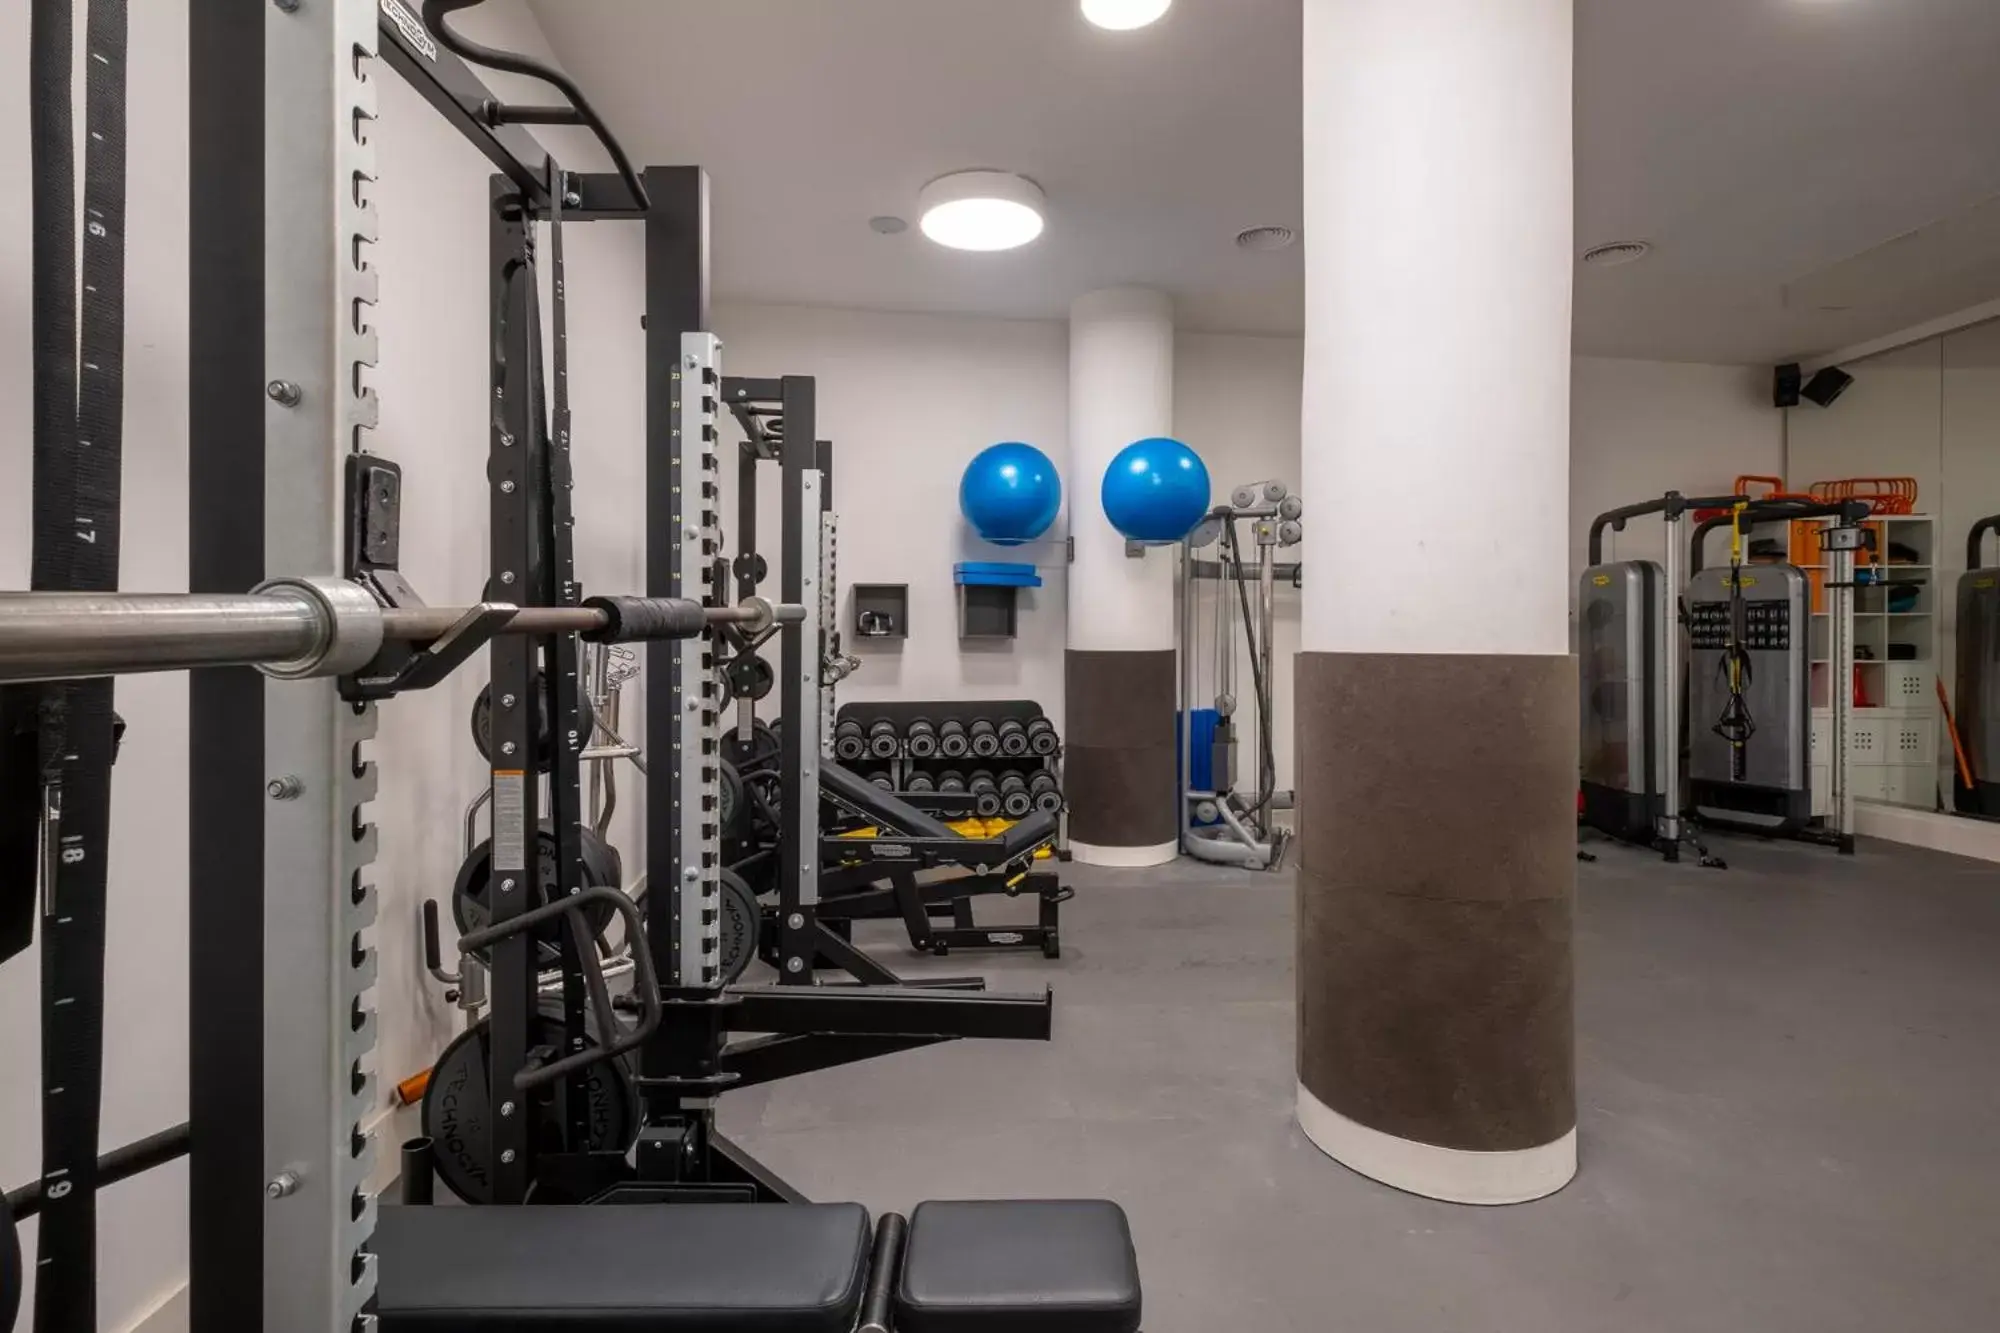 Fitness centre/facilities, Fitness Center/Facilities in Eurostars Sitges